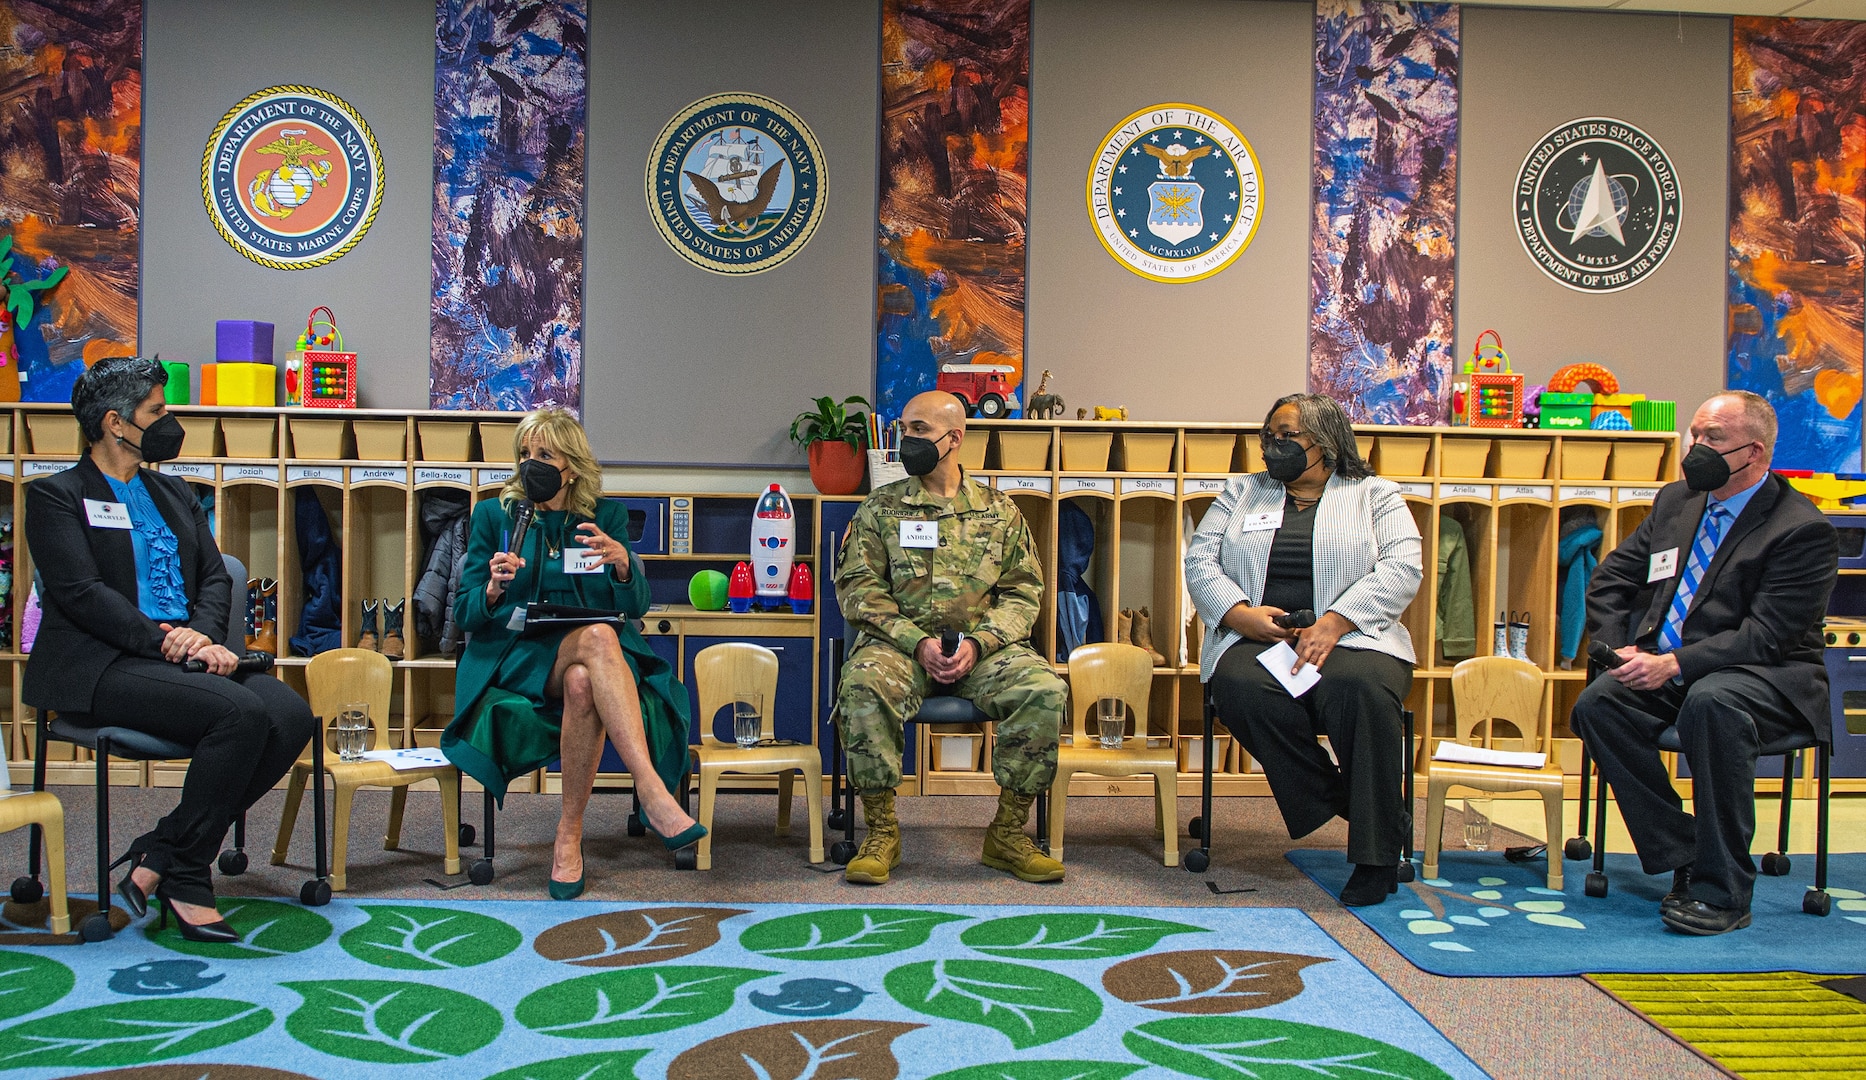 First Lady visits JBSA-Lackland to discuss Joining Forces initiative